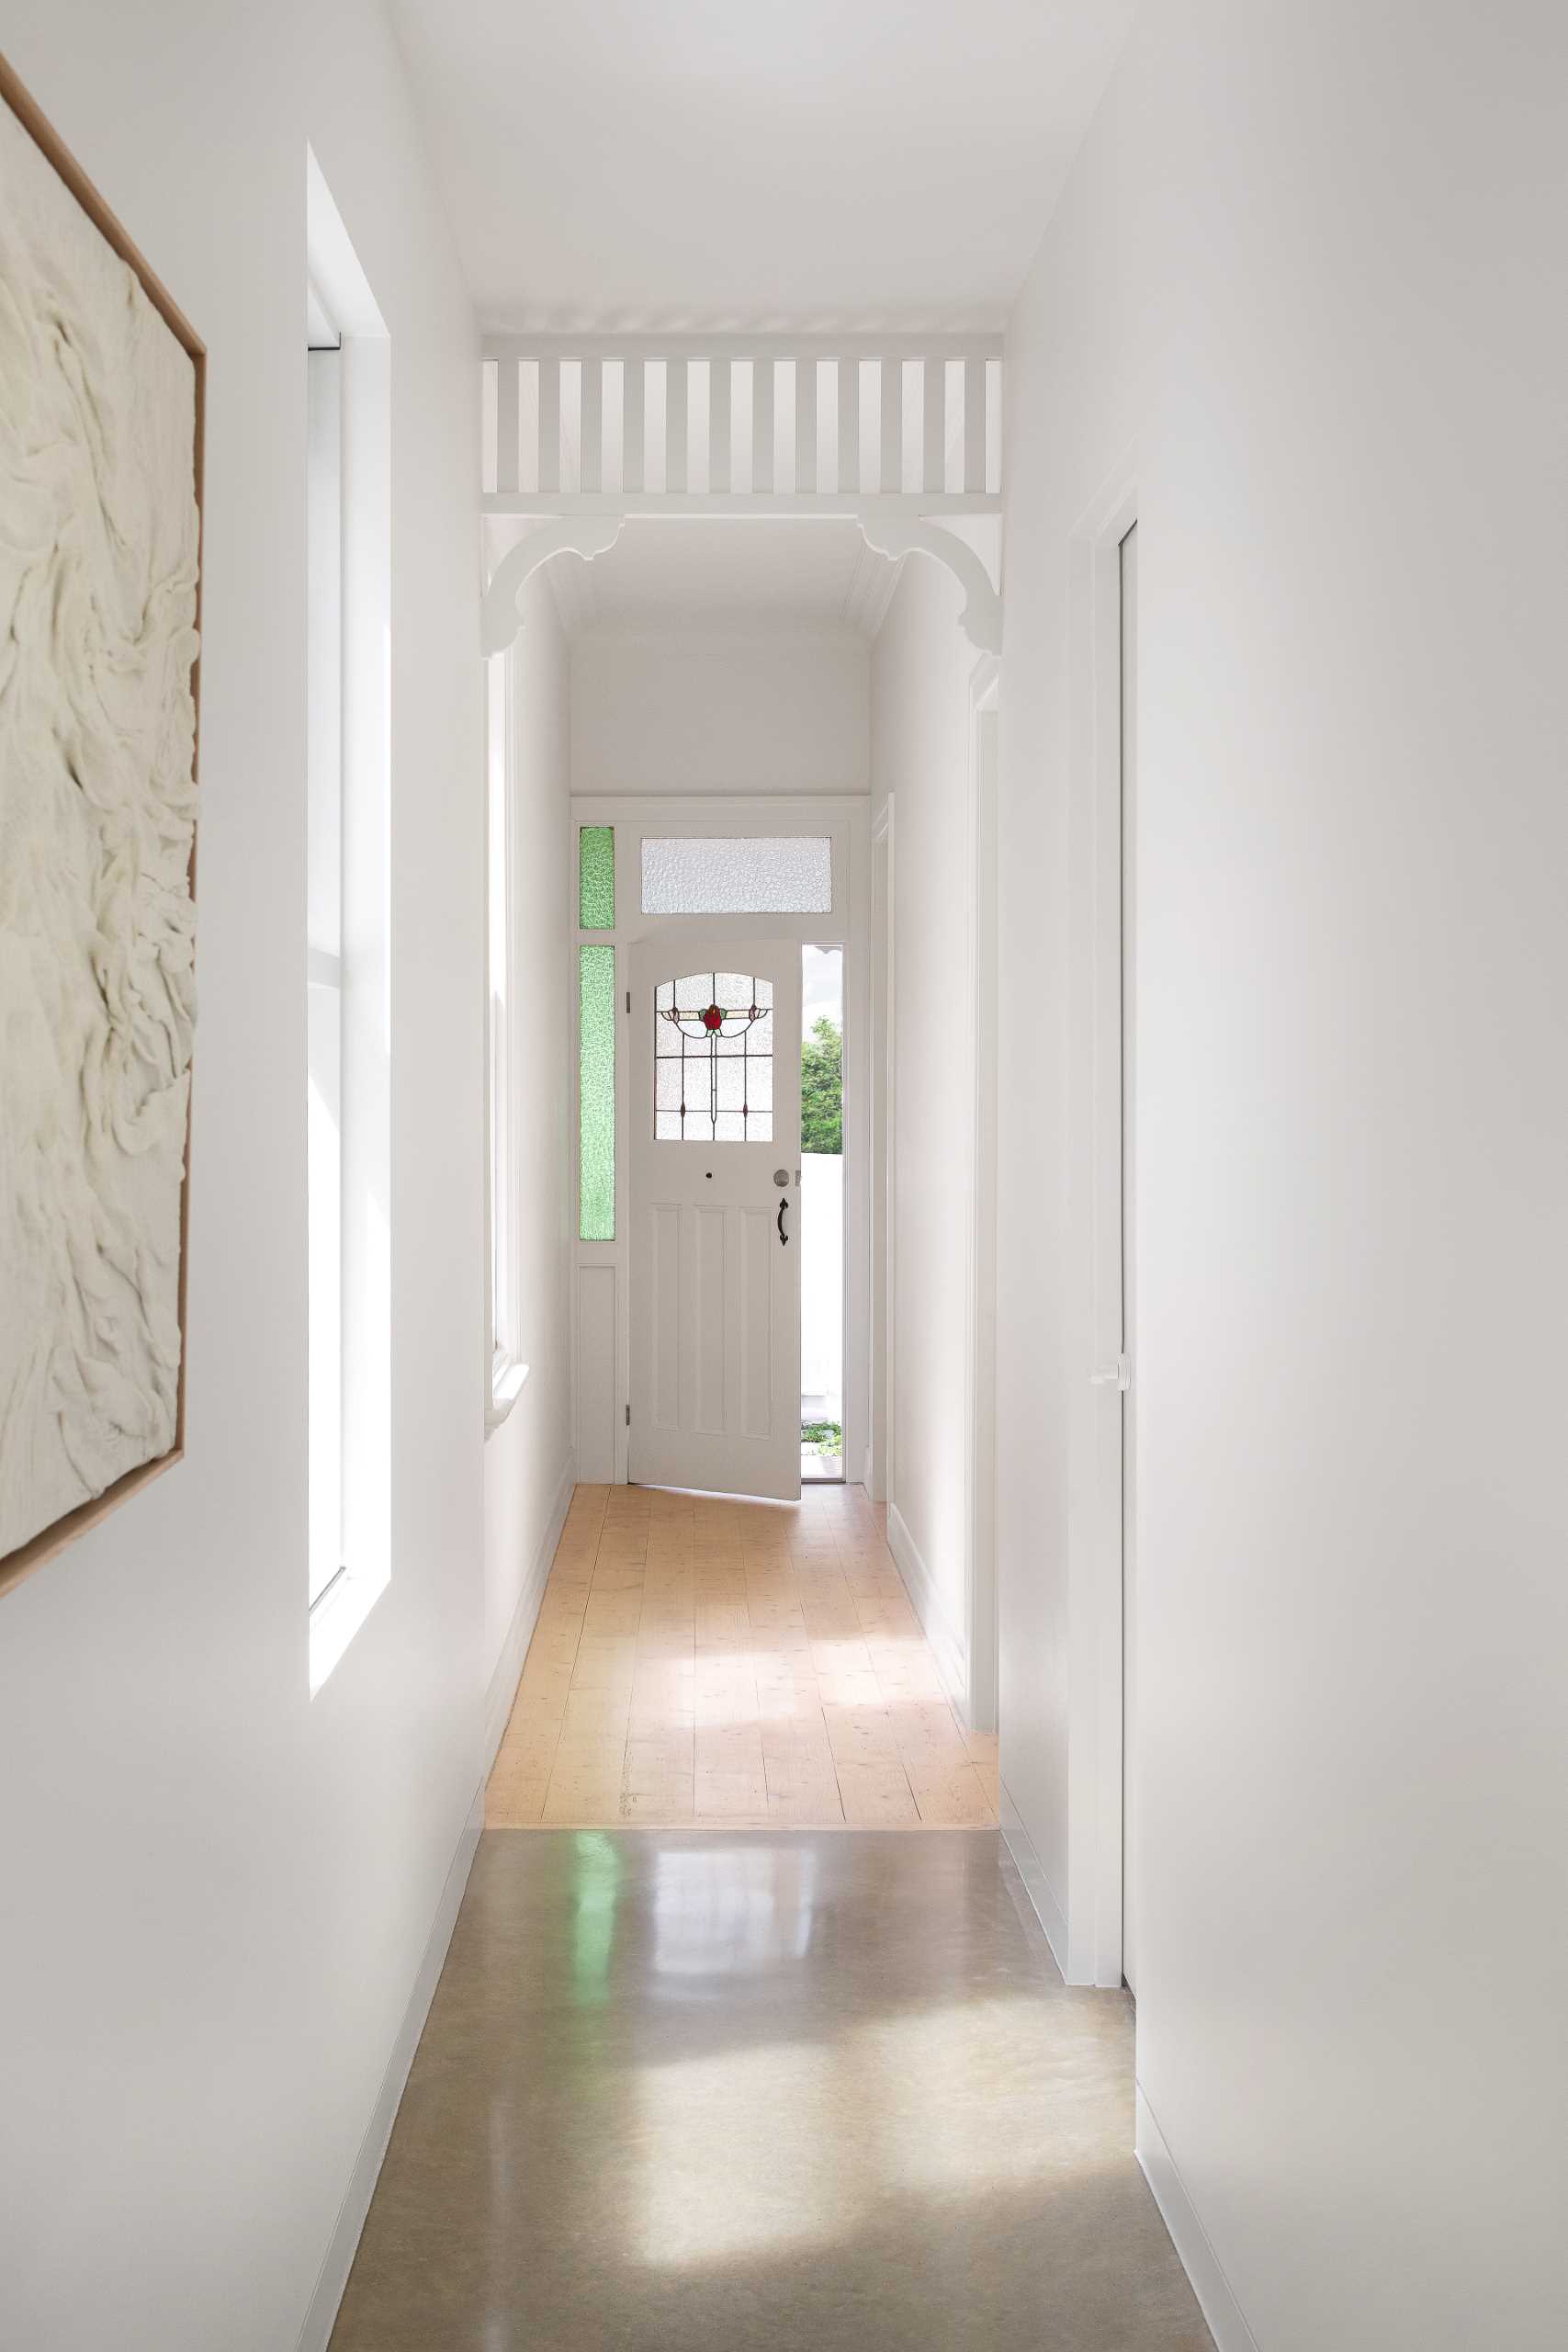 The entry hallway connects the original part of the home with the new extension.